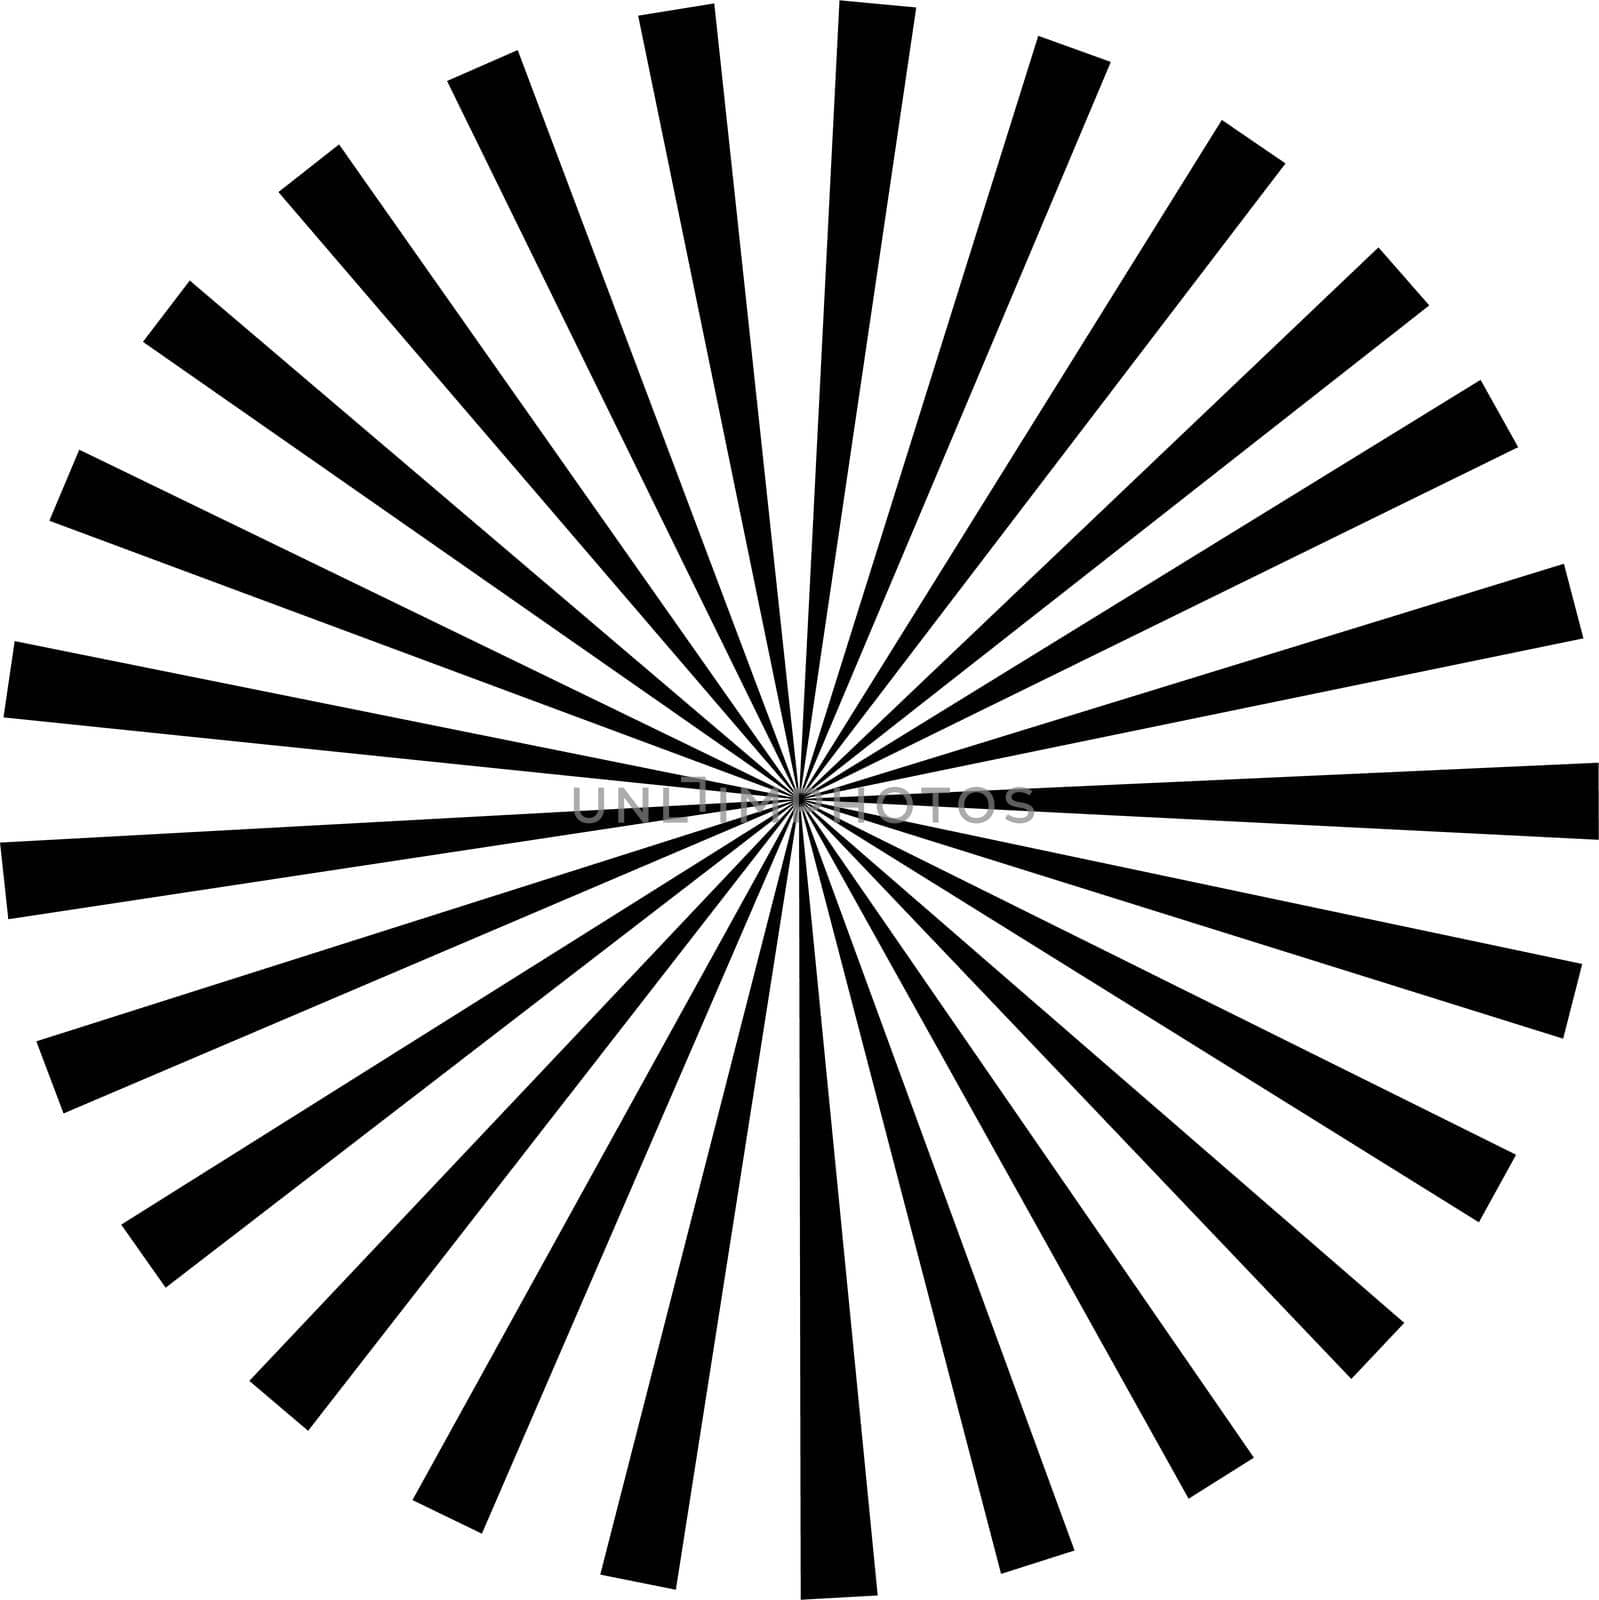 Abstract background in black and white stripes in the form of a circle